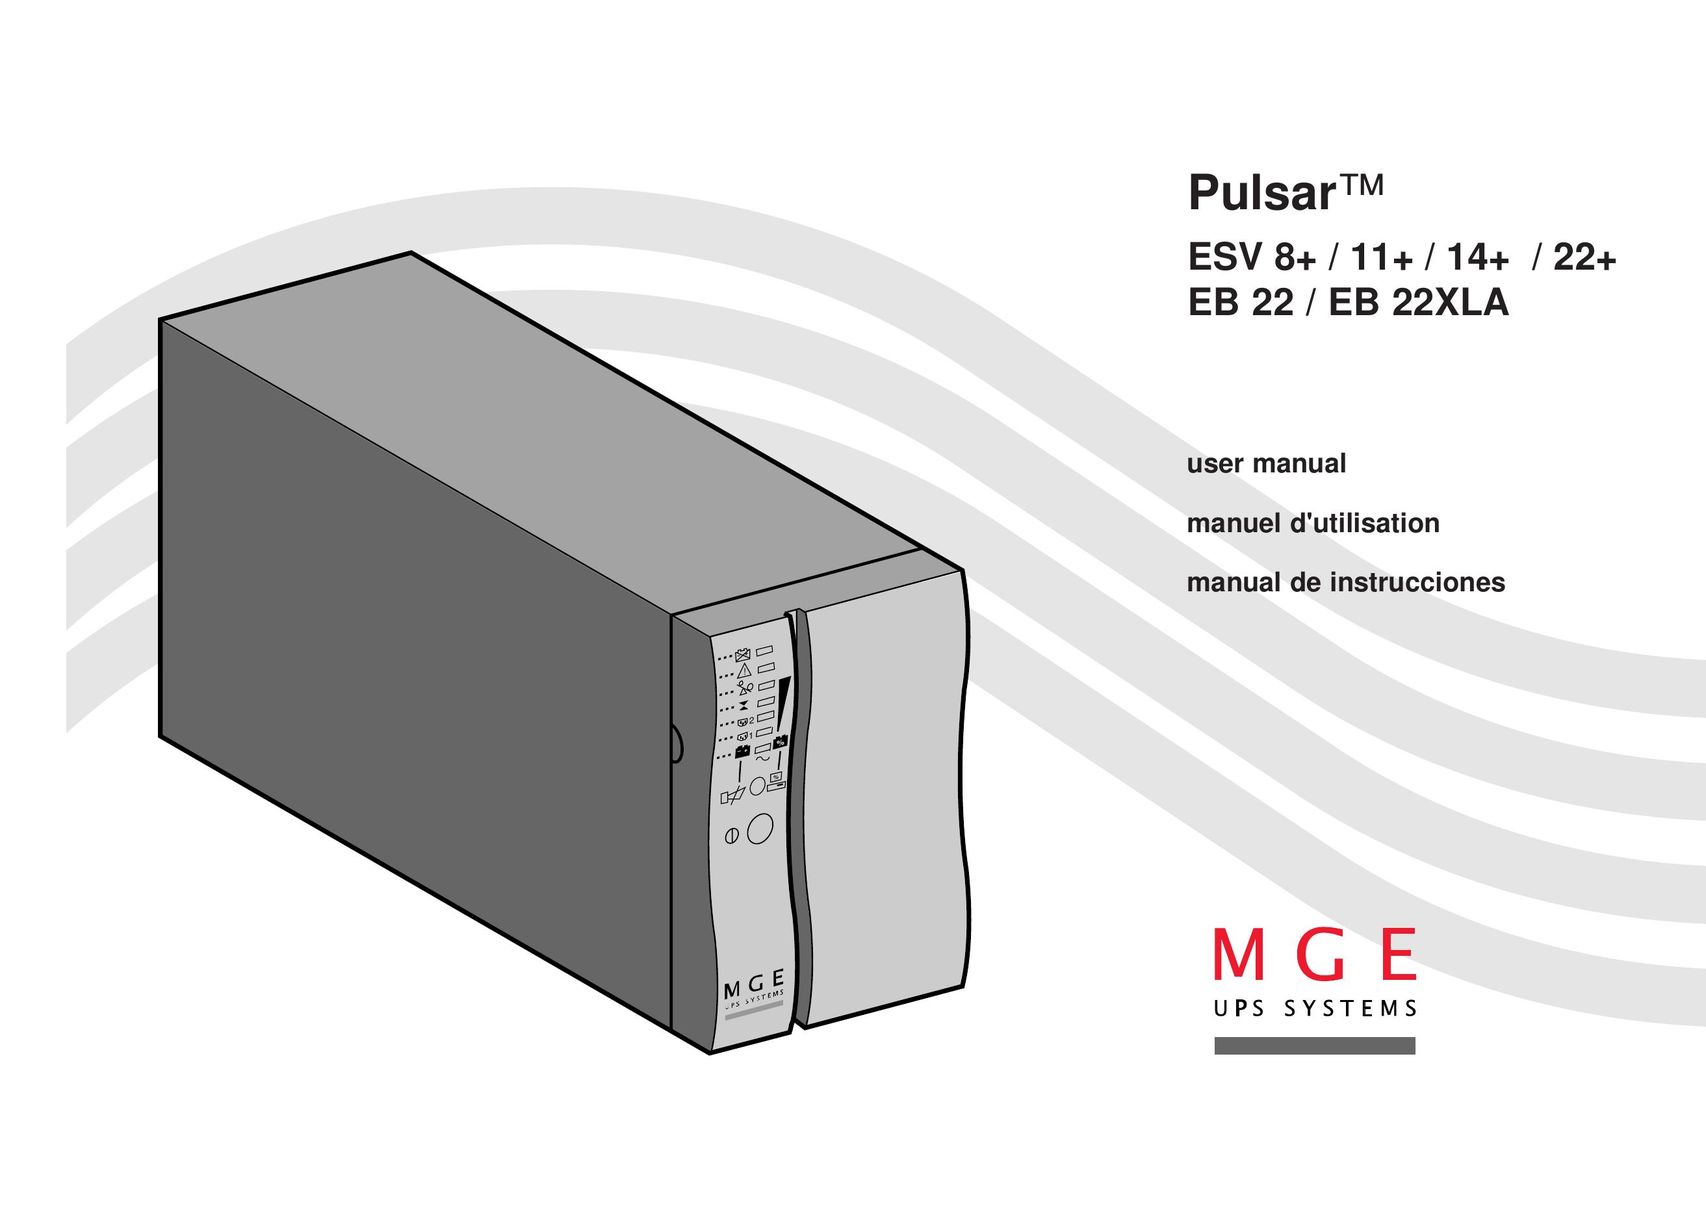 MGE UPS Systems 22+ EB 22 Power Supply User Manual